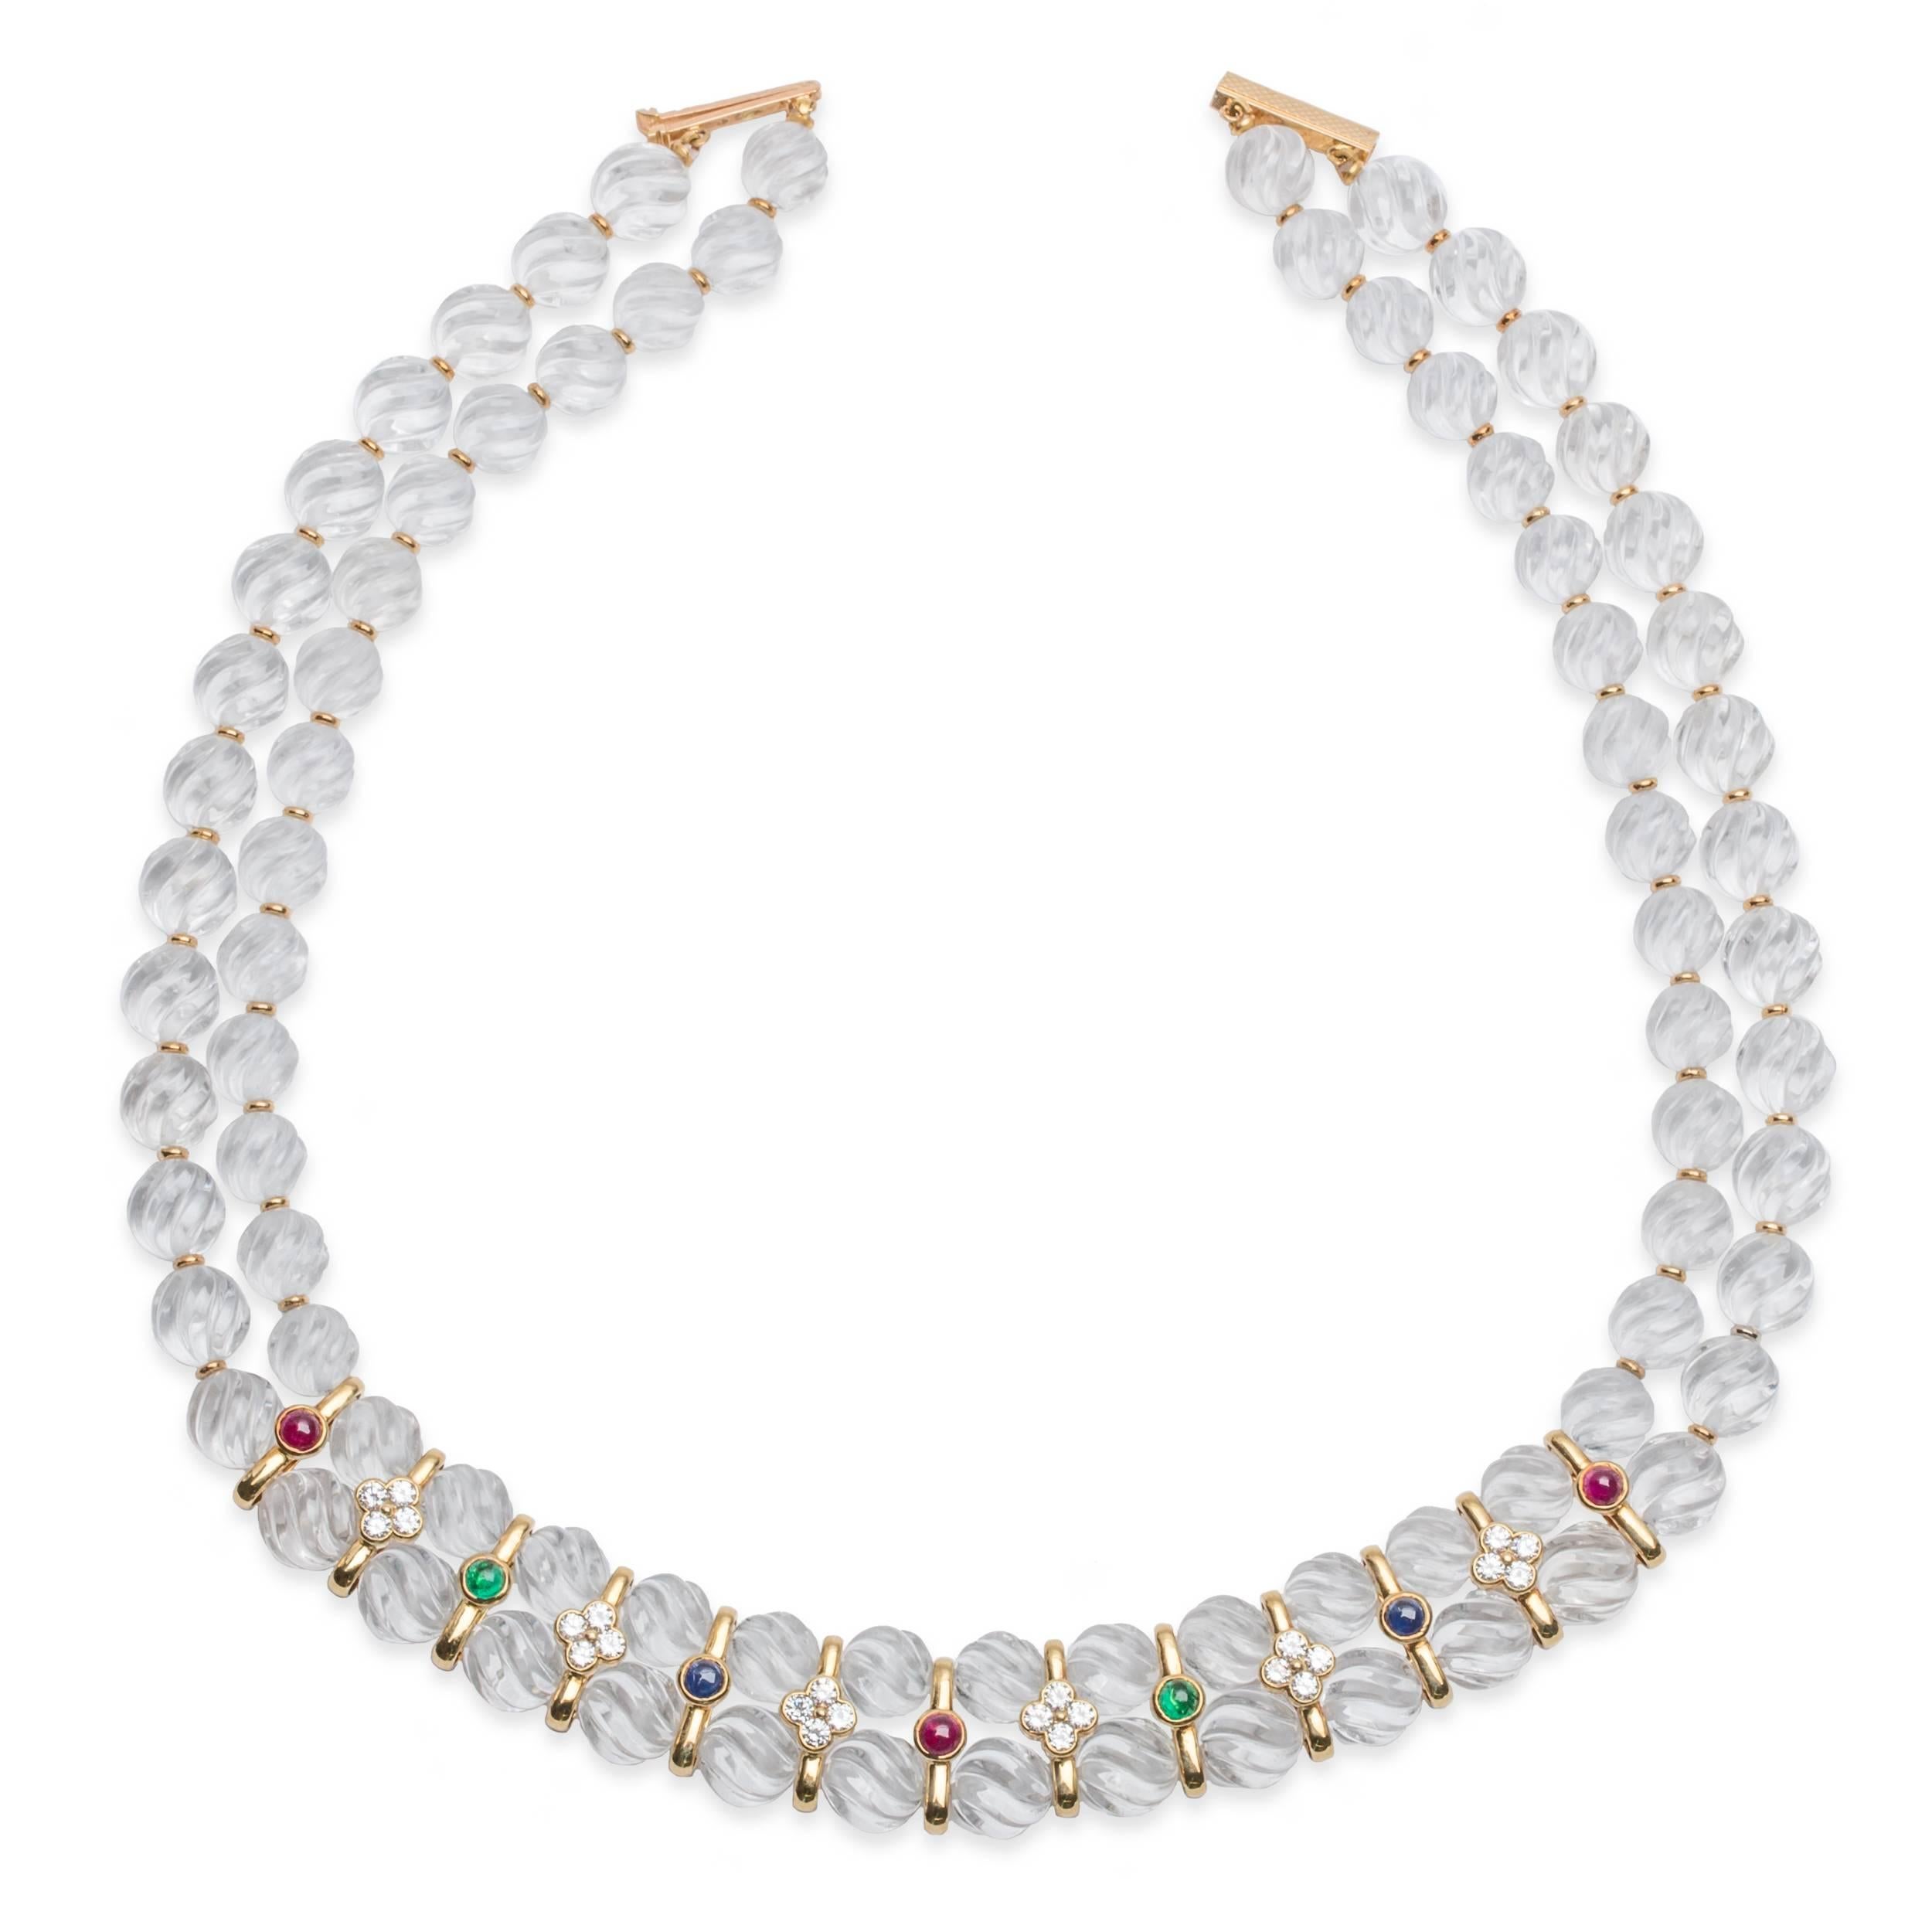 Boucheron Diamond, Ruby, Emerald, Saphire, and Quartz Necklace and Earring Set in 18K Yellow Gold, Total Diamond Weight: 2.00ct., Earrings Length: 1